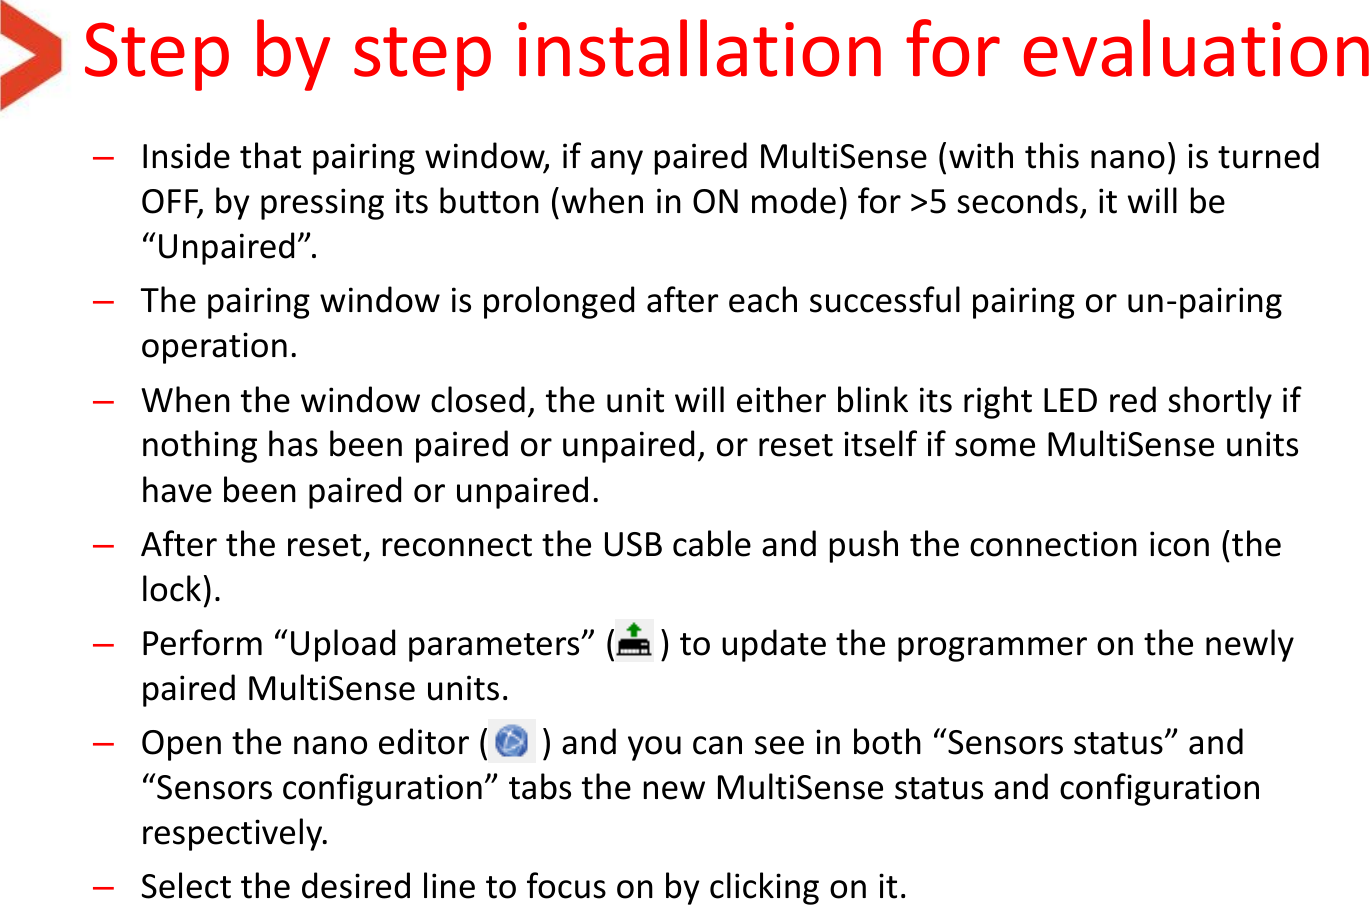 Step by step installation for evaluation –Inside that pairing window, if any paired MultiSense (with this nano) is turned OFF, by pressing its button (when in ON mode) for &gt;5 seconds, it will be “Unpaired”. –The pairing window is prolonged after each successful pairing or un-pairing operation. –When the window closed, the unit will either blink its right LED red shortly if nothing has been paired or unpaired, or reset itself if some MultiSense units have been paired or unpaired. –After the reset, reconnect the USB cable and push the connection icon (the lock). –Perform “Upload parameters” (     ) to update the programmer on the newly paired MultiSense units. –Open the nano editor (      ) and you can see in both “Sensors status” and “Sensors configuration” tabs the new MultiSense status and configuration respectively. –Select the desired line to focus on by clicking on it.  